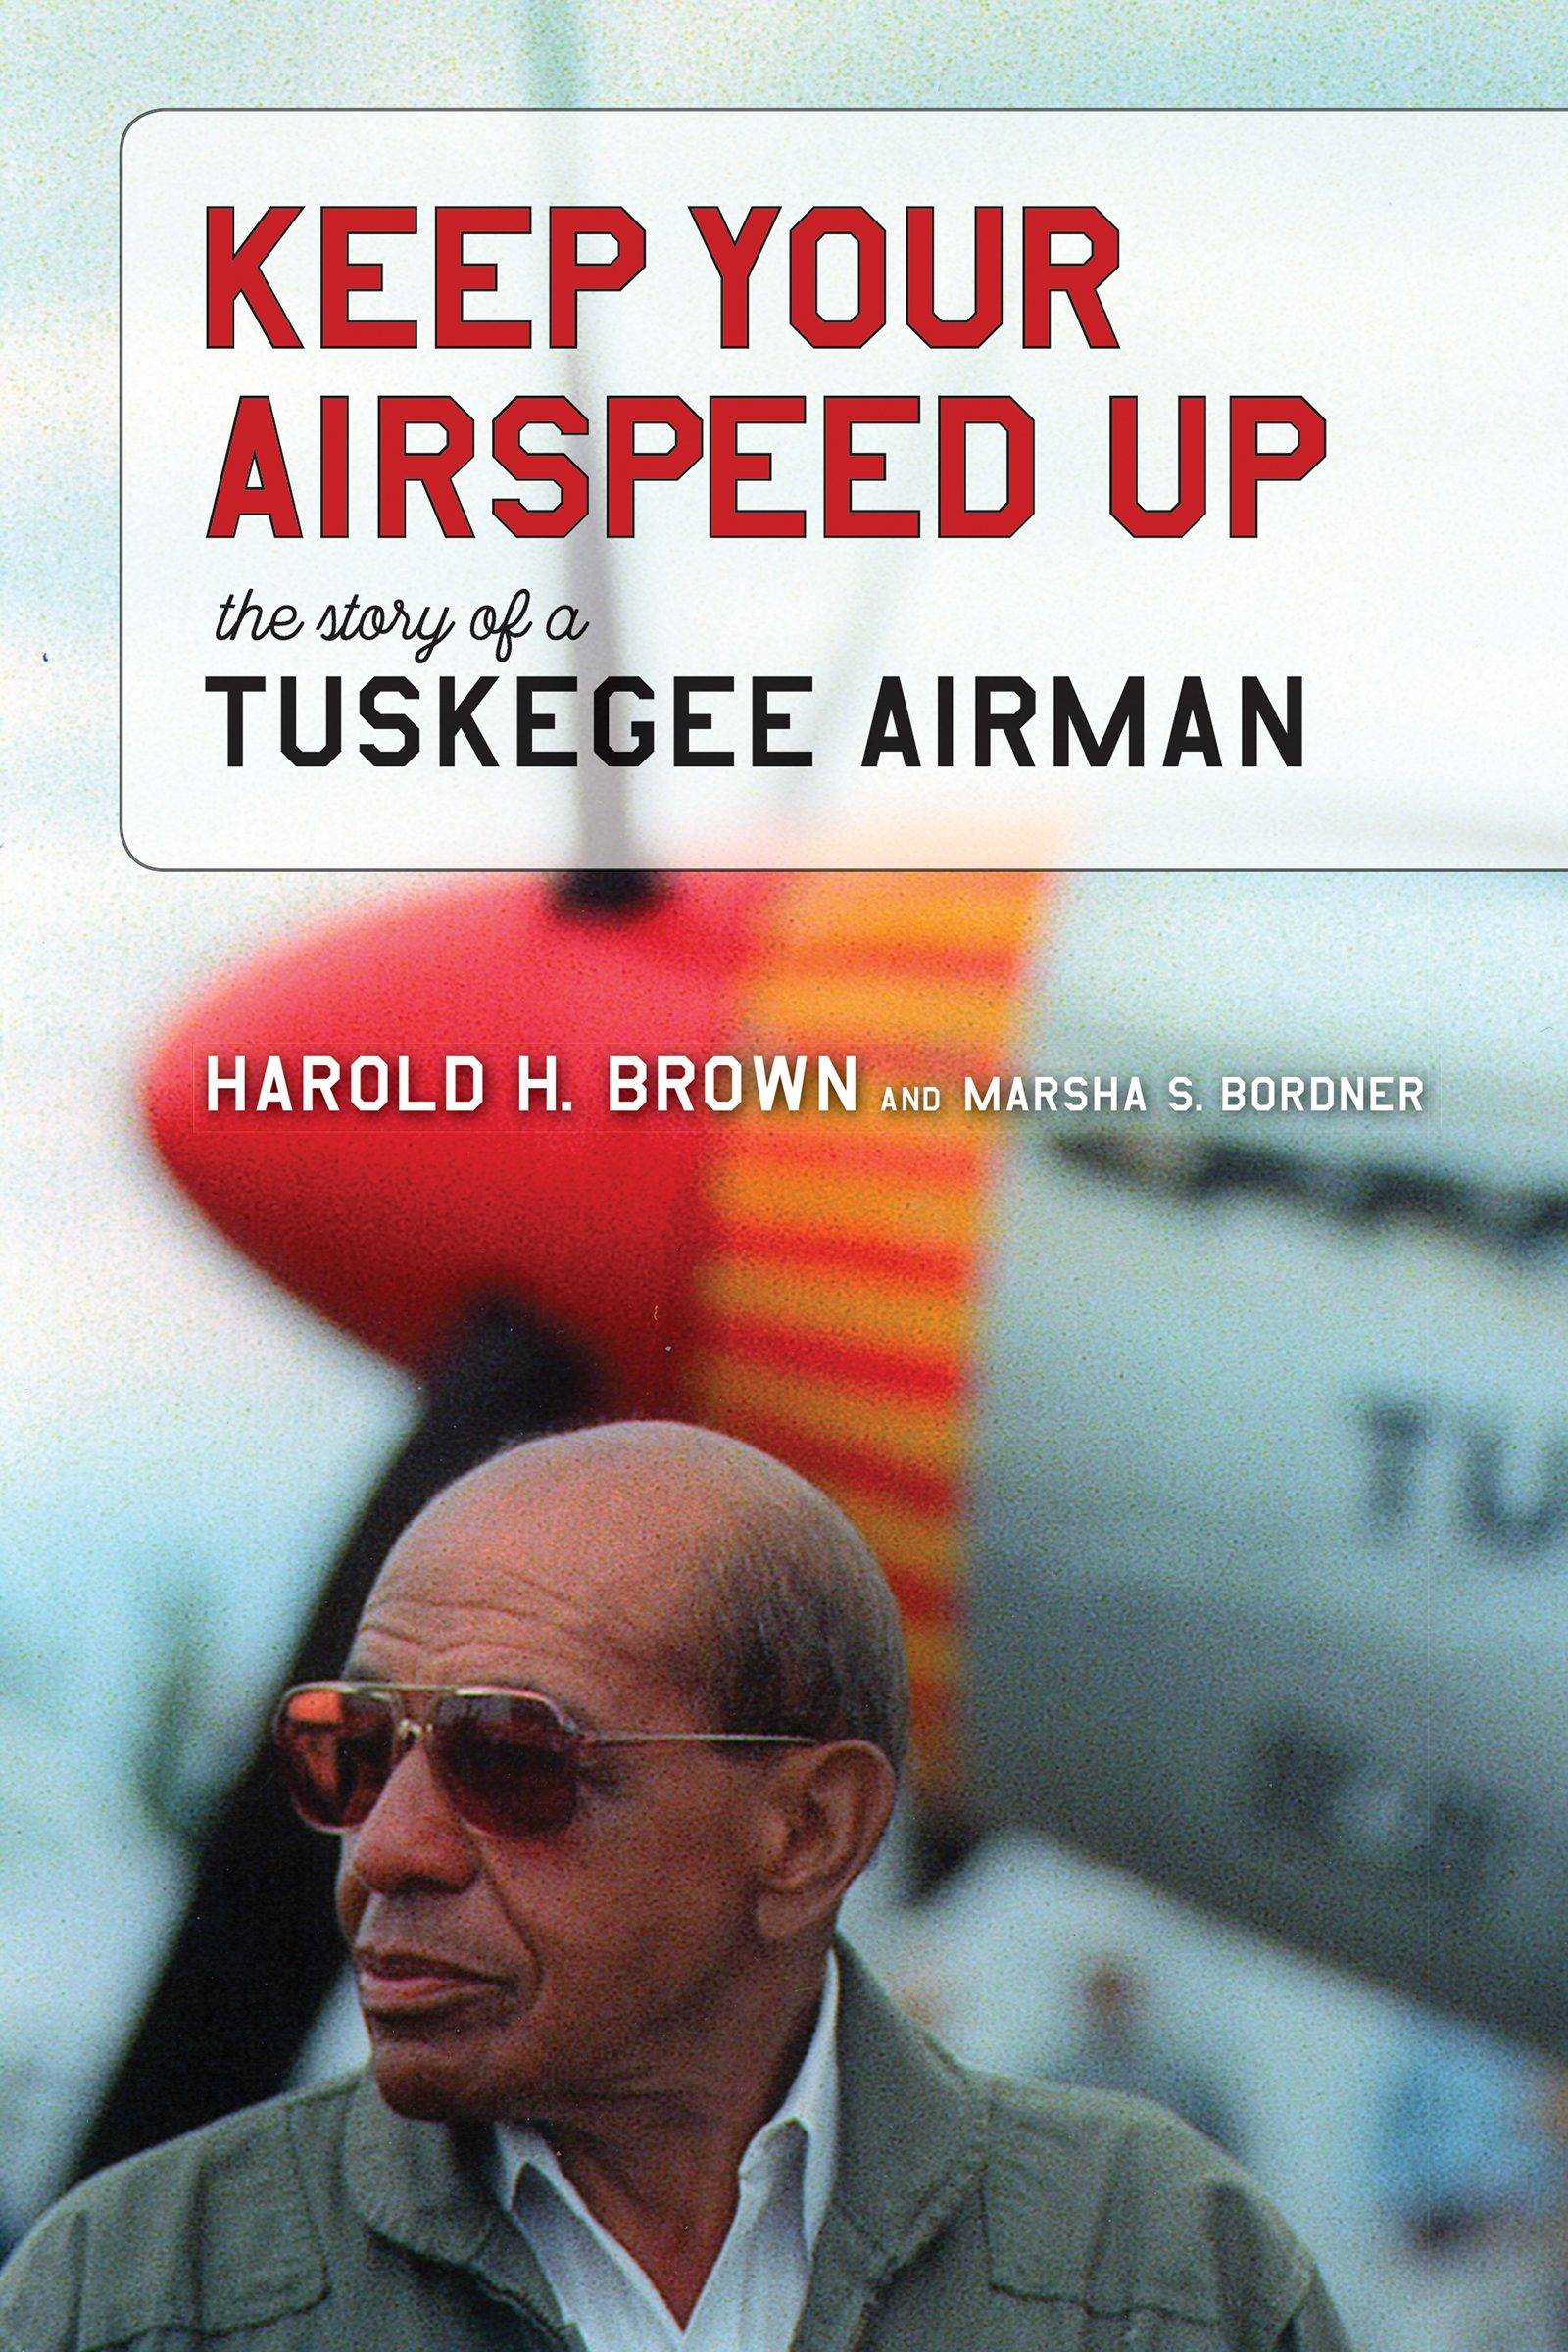 The Bookworm Sez: ‘Keep Your Airspeed Up’ tells a big story